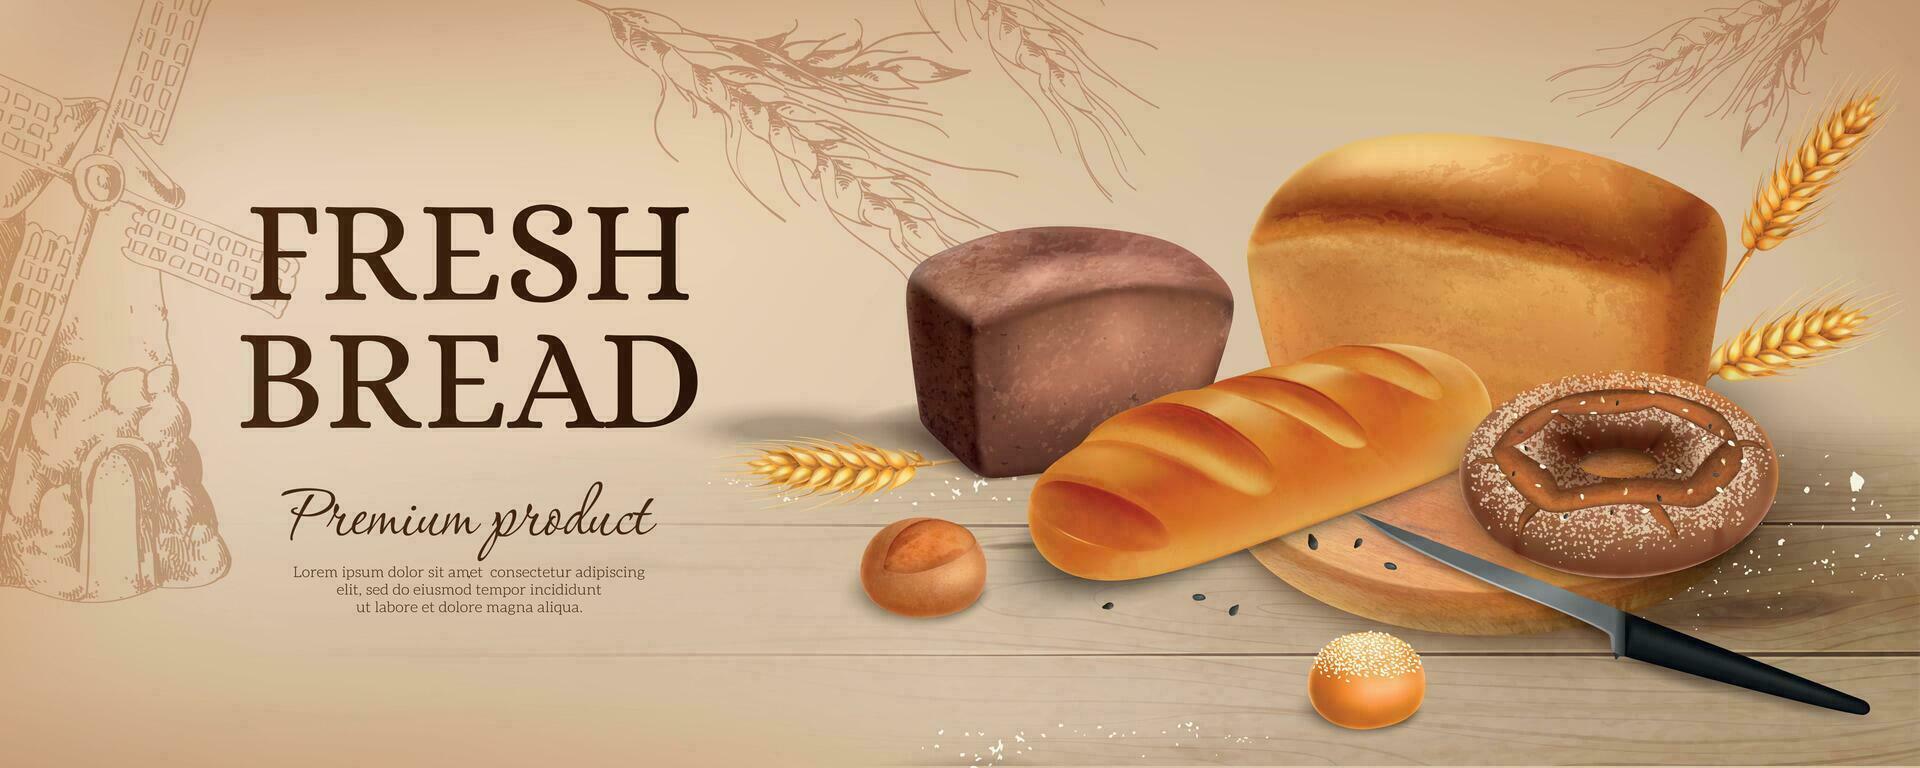 Realistic Bread Ads Horizontal Poster vector